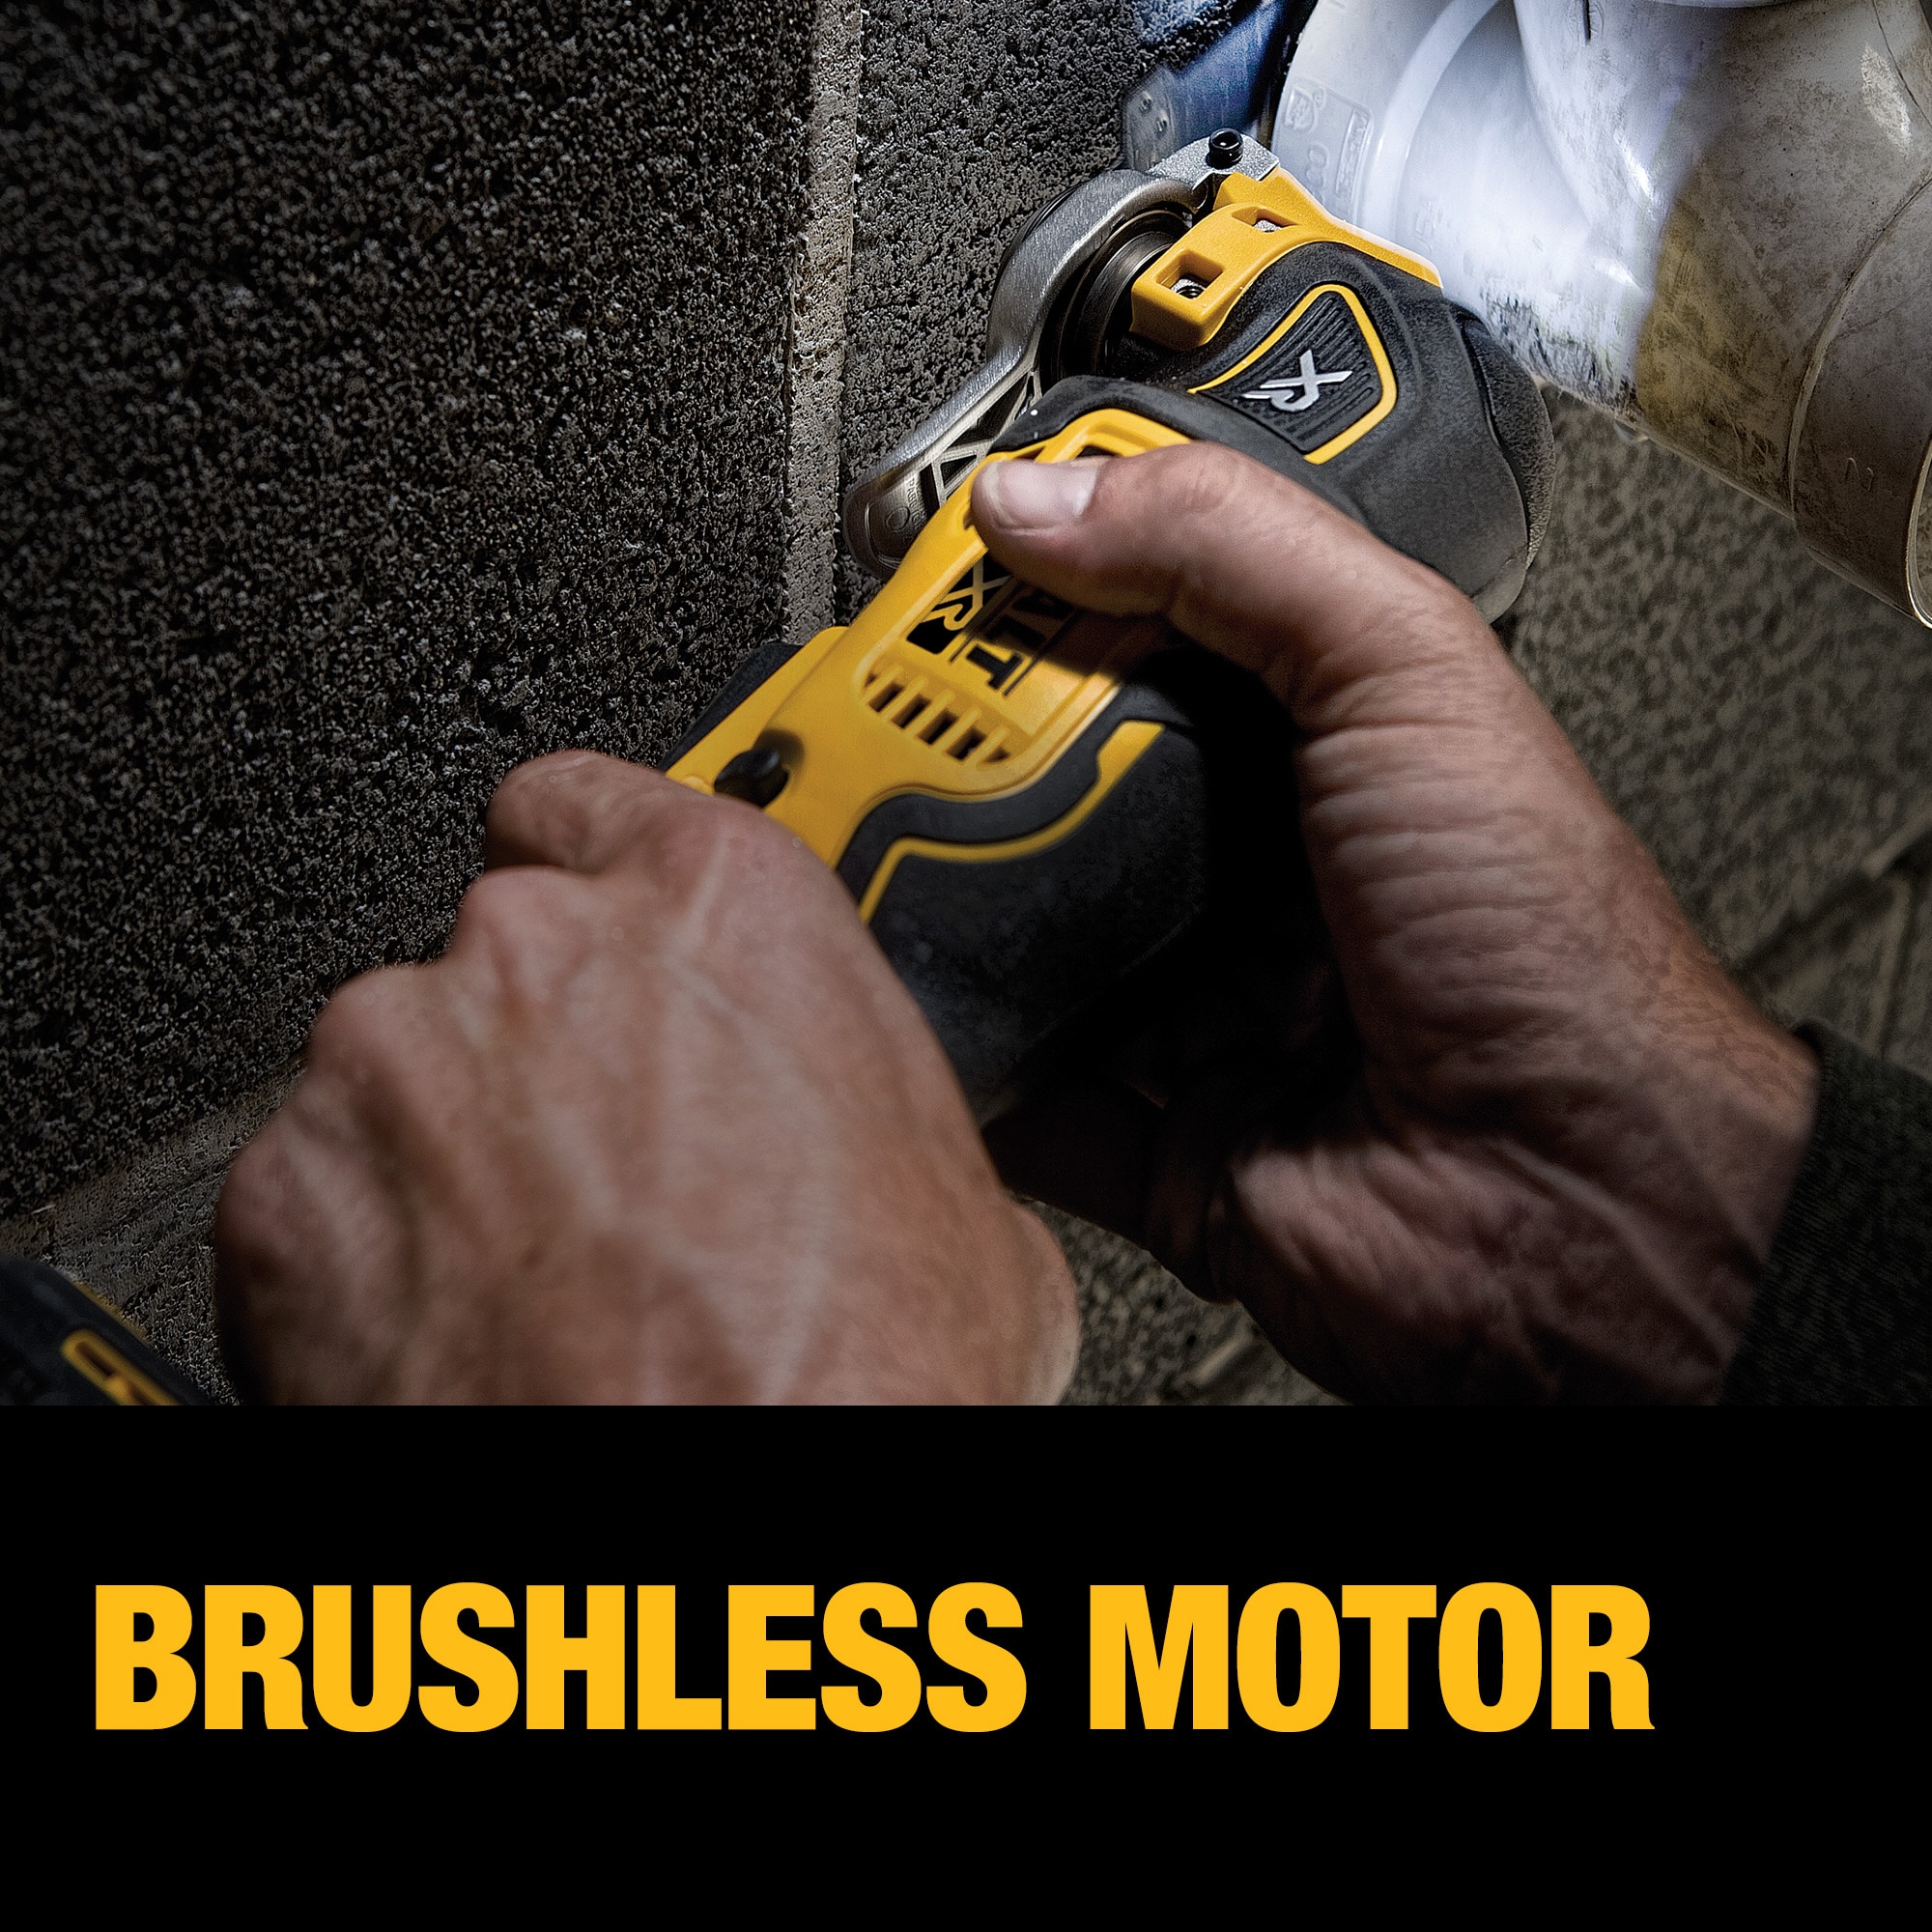 DEWALT 20V MAX XR Cordless Brushless 3-Speed Oscillating Multi Tool with  (1) 20V 1.5Ah Battery and Charger DCS356C1 - The Home Depot